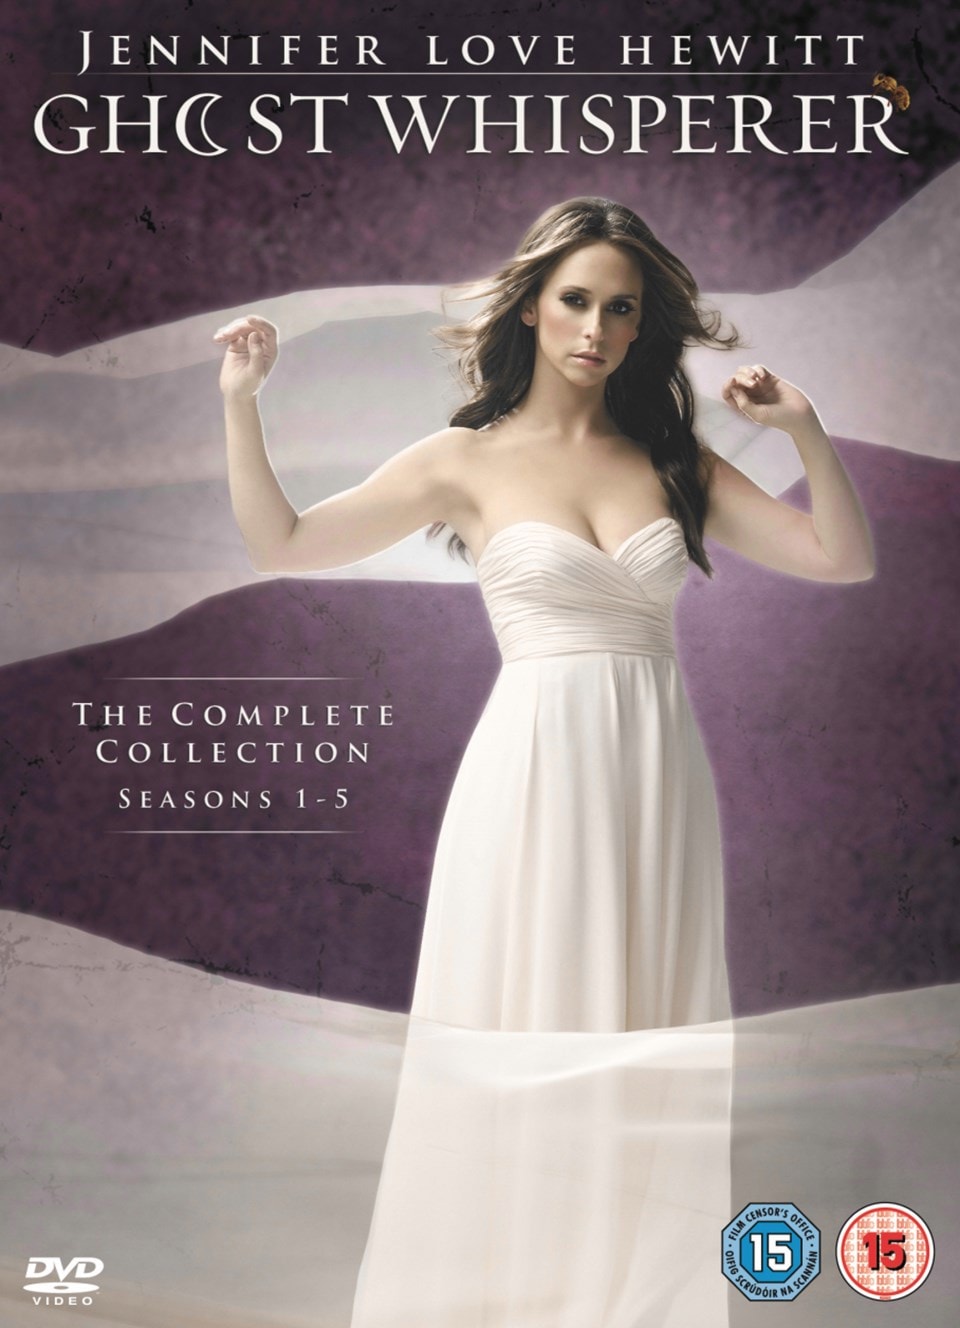 Ghost Whisperer: The Complete Collection | DVD Box Set | Free shipping